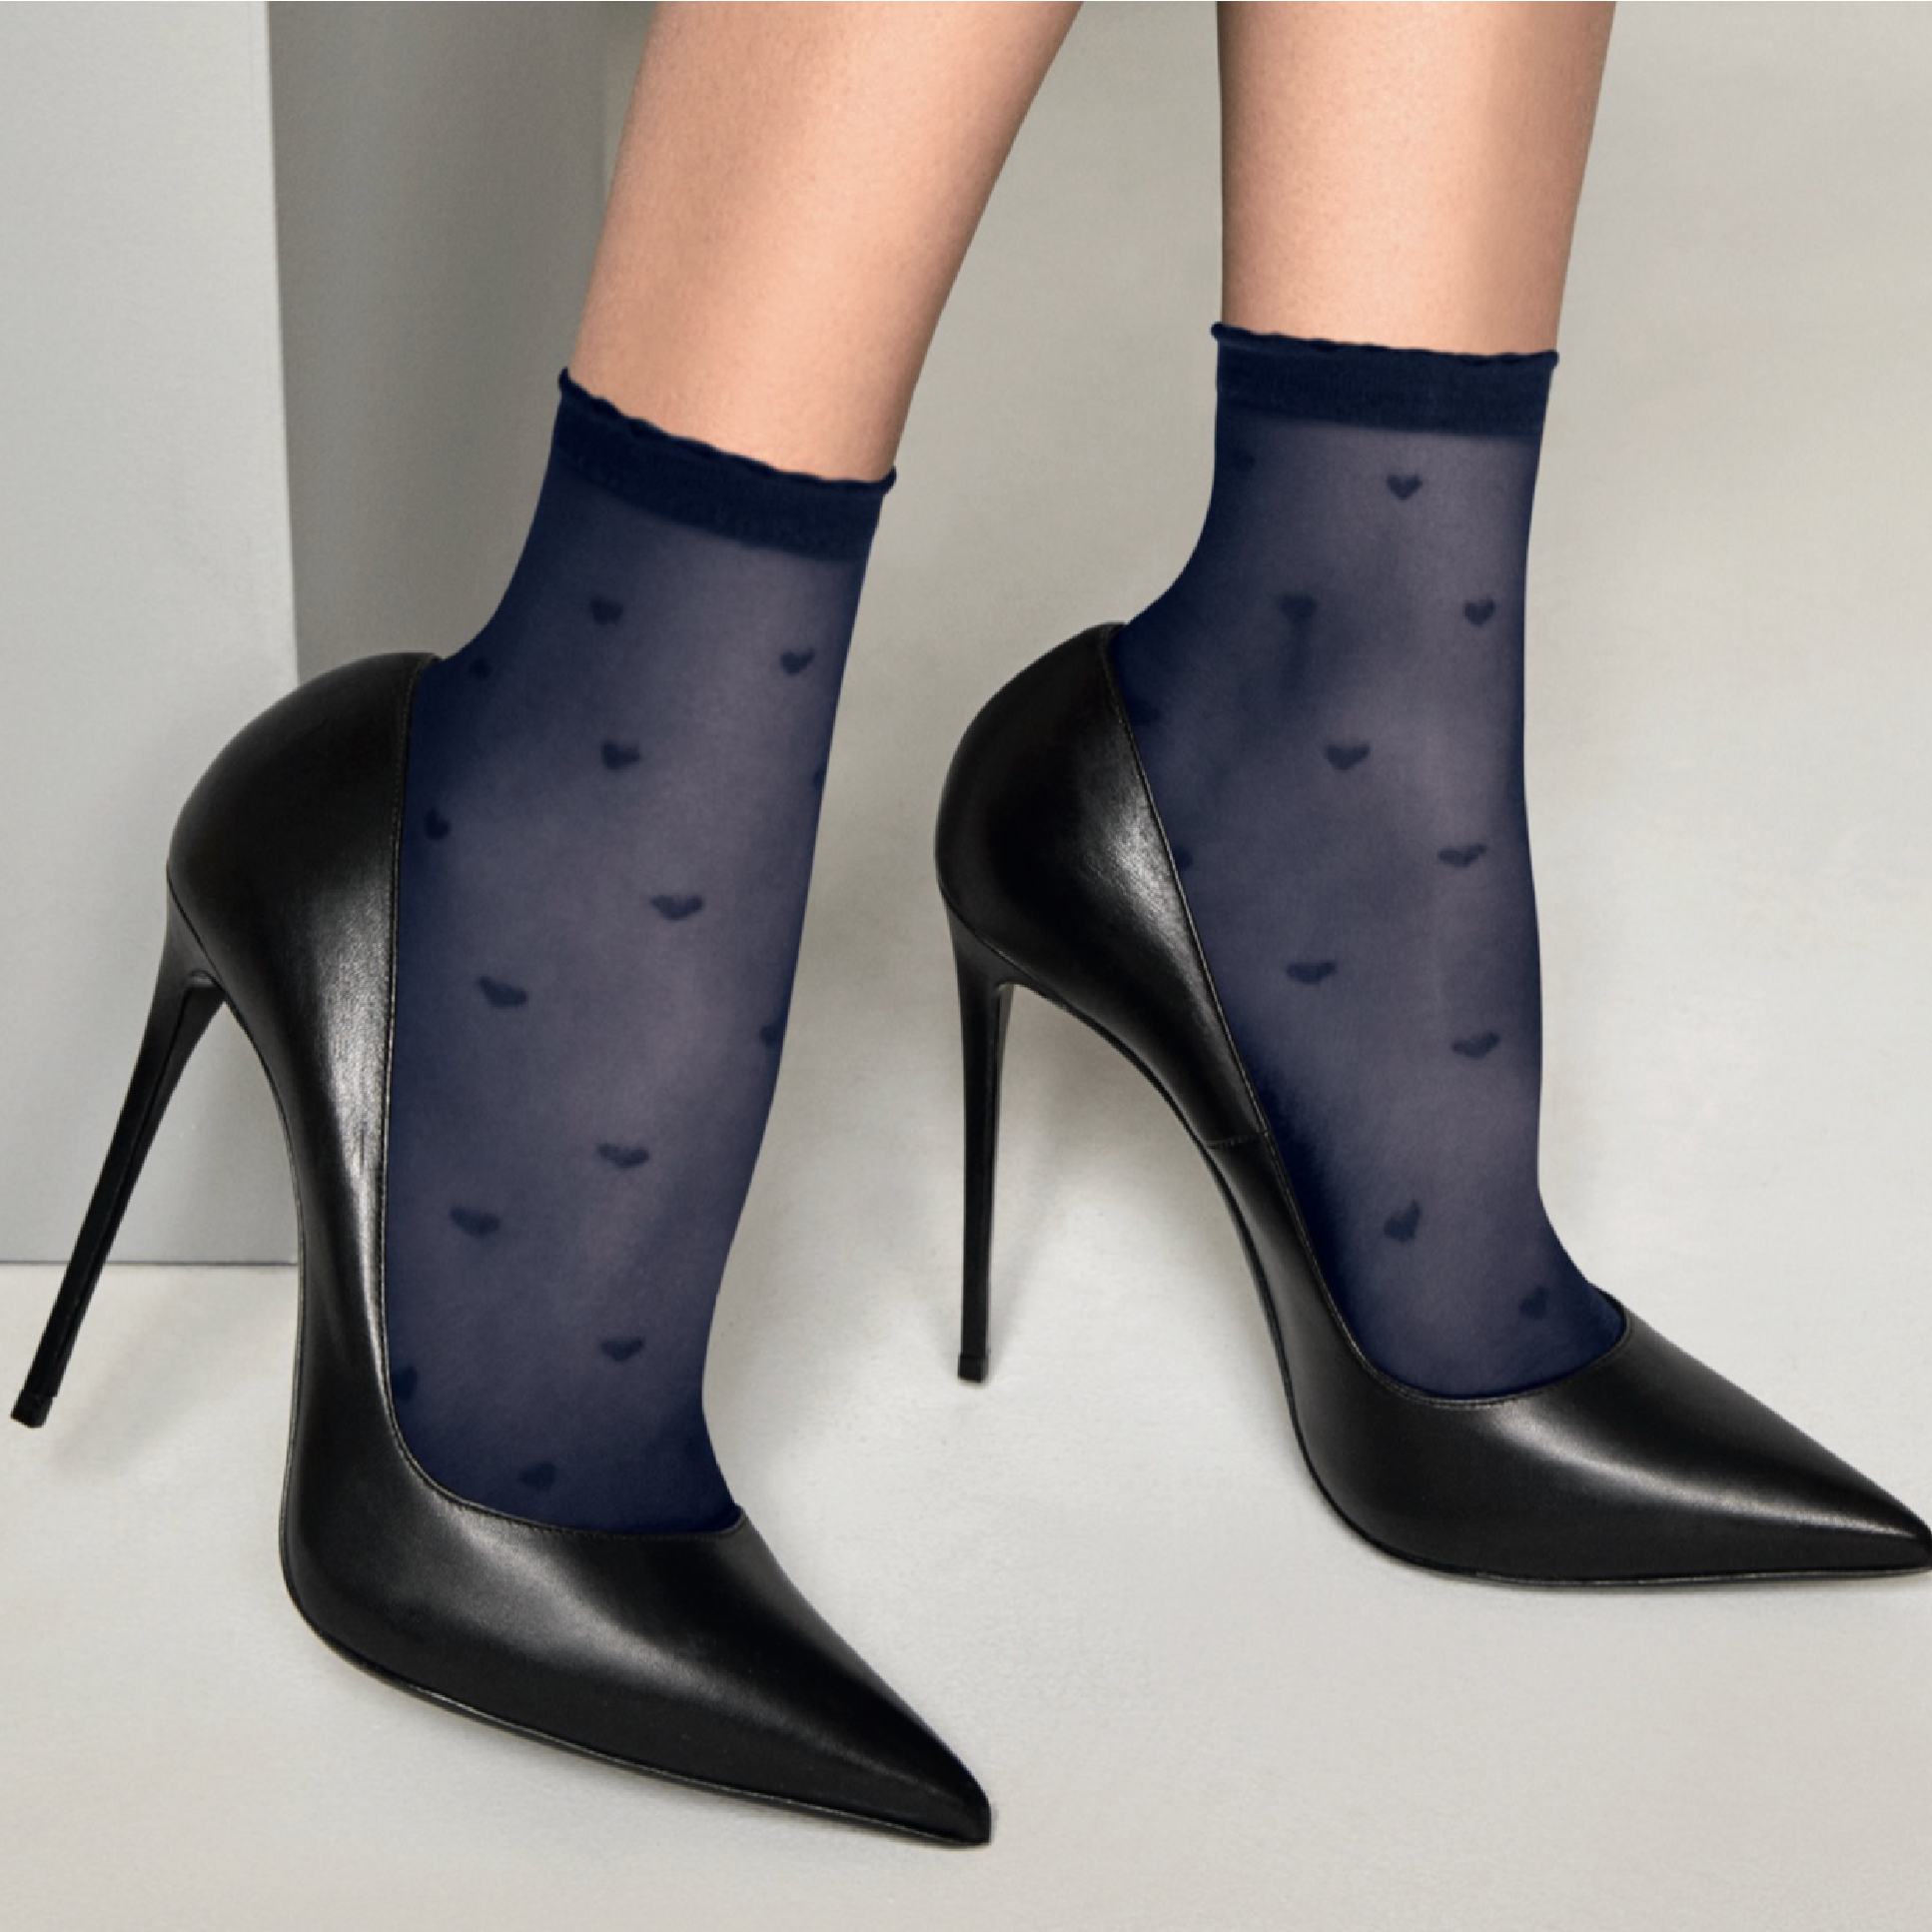 Omsa 3531 Lovie Calzino - Sheer fashion ankle socks with an all over heart pattern and comfort scalloped cuff. Available in black, navy and nude.